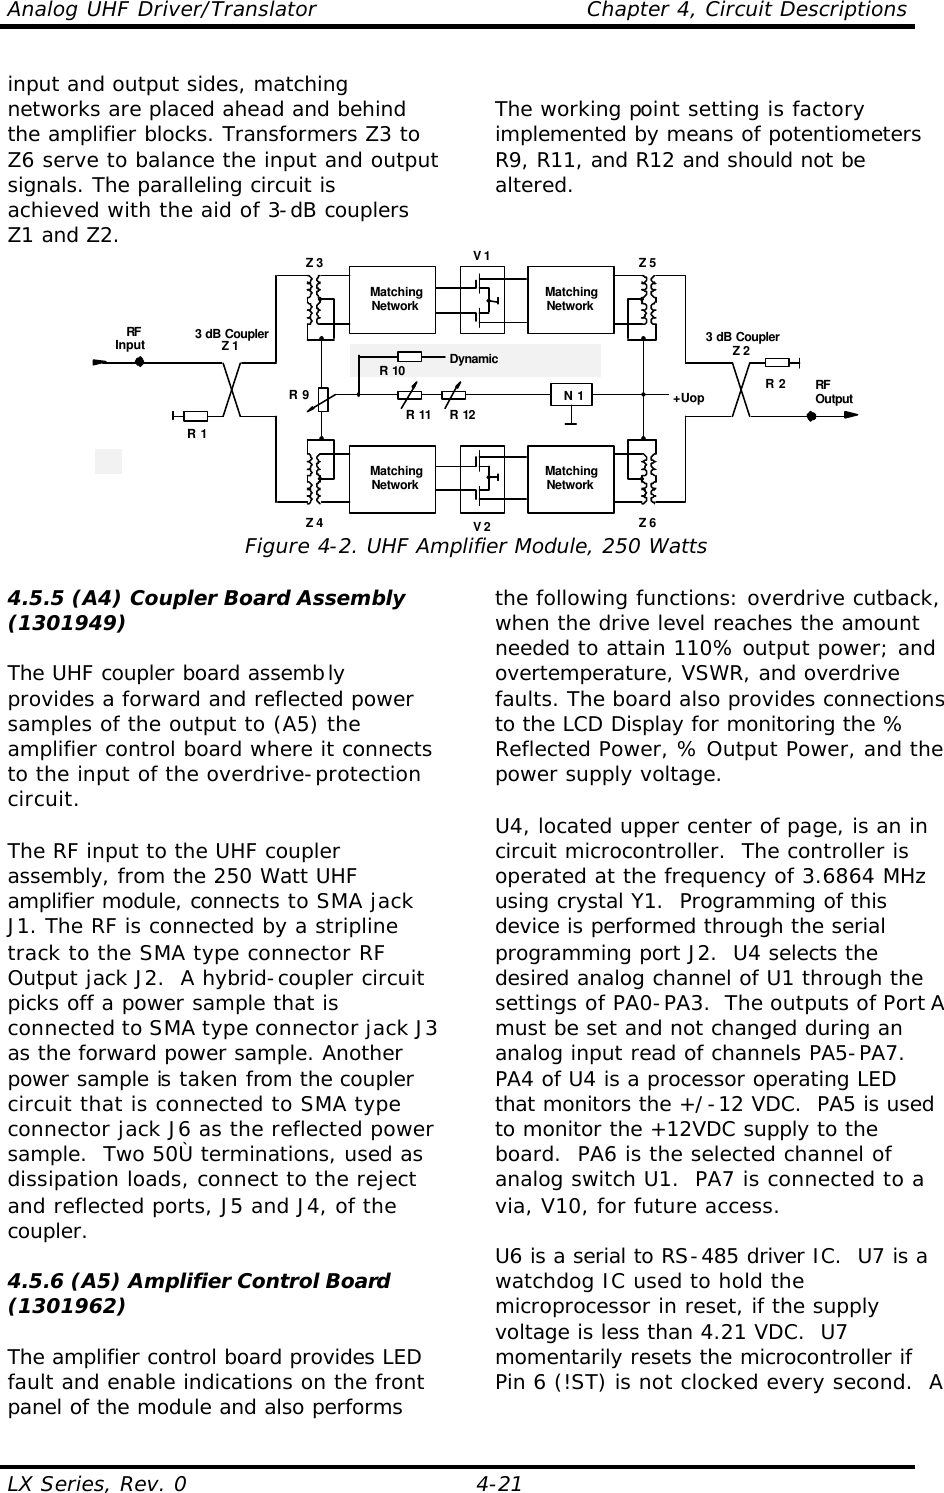 Analog UHF Driver/Translator    Chapter 4, Circuit Descriptions LX Series, Rev. 0    4-21 input and output sides, matching networks are placed ahead and behind the amplifier blocks. Transformers Z3 to Z6 serve to balance the input and output signals. The paralleling circuit is achieved with the aid of 3-dB couplers Z1 and Z2.  The working point setting is factory implemented by means of potentiometers R9, R11, and R12 and should not be altered.  V 13 dB CouplerZ 2RFOutputRFInput 3 dB CouplerZ 1R 2R 1MatchingNetworkMatchingNetworkV 2MatchingNetworkMatchingNetworkZ 3 Z 5Z 4 Z 6+UopN 1R 11 R 12R 9R 10 DynamicEqualization Figure 4-2. UHF Amplifier Module, 250 Watts 4.5.5 (A4) Coupler Board Assembly (1301949)  The UHF coupler board assembly provides a forward and reflected power samples of the output to (A5) the amplifier control board where it connects to the input of the overdrive-protection circuit.  The RF input to the UHF coupler assembly, from the 250 Watt UHF amplifier module, connects to SMA jack J1. The RF is connected by a stripline track to the SMA type connector RF Output jack J2.  A hybrid-coupler circuit picks off a power sample that is connected to SMA type connector jack J3 as the forward power sample. Another power sample is taken from the coupler circuit that is connected to SMA type connector jack J6 as the reflected power sample.  Two 50Ù terminations, used as dissipation loads, connect to the reject and reflected ports, J5 and J4, of the coupler.  4.5.6 (A5) Amplifier Control Board (1301962)  The amplifier control board provides LED fault and enable indications on the front panel of the module and also performs the following functions: overdrive cutback, when the drive level reaches the amount needed to attain 110% output power; and overtemperature, VSWR, and overdrive faults. The board also provides connections to the LCD Display for monitoring the % Reflected Power, % Output Power, and the power supply voltage.  U4, located upper center of page, is an in circuit microcontroller.  The controller is operated at the frequency of 3.6864 MHz using crystal Y1.  Programming of this device is performed through the serial programming port J2.  U4 selects the desired analog channel of U1 through the settings of PA0-PA3.  The outputs of Port A must be set and not changed during an analog input read of channels PA5-PA7.  PA4 of U4 is a processor operating LED that monitors the +/-12 VDC.  PA5 is used to monitor the +12VDC supply to the board.  PA6 is the selected channel of analog switch U1.  PA7 is connected to a via, V10, for future access.  U6 is a serial to RS-485 driver IC.  U7 is a watchdog IC used to hold the microprocessor in reset, if the supply voltage is less than 4.21 VDC.  U7 momentarily resets the microcontroller if Pin 6 (!ST) is not clocked every second.  A 